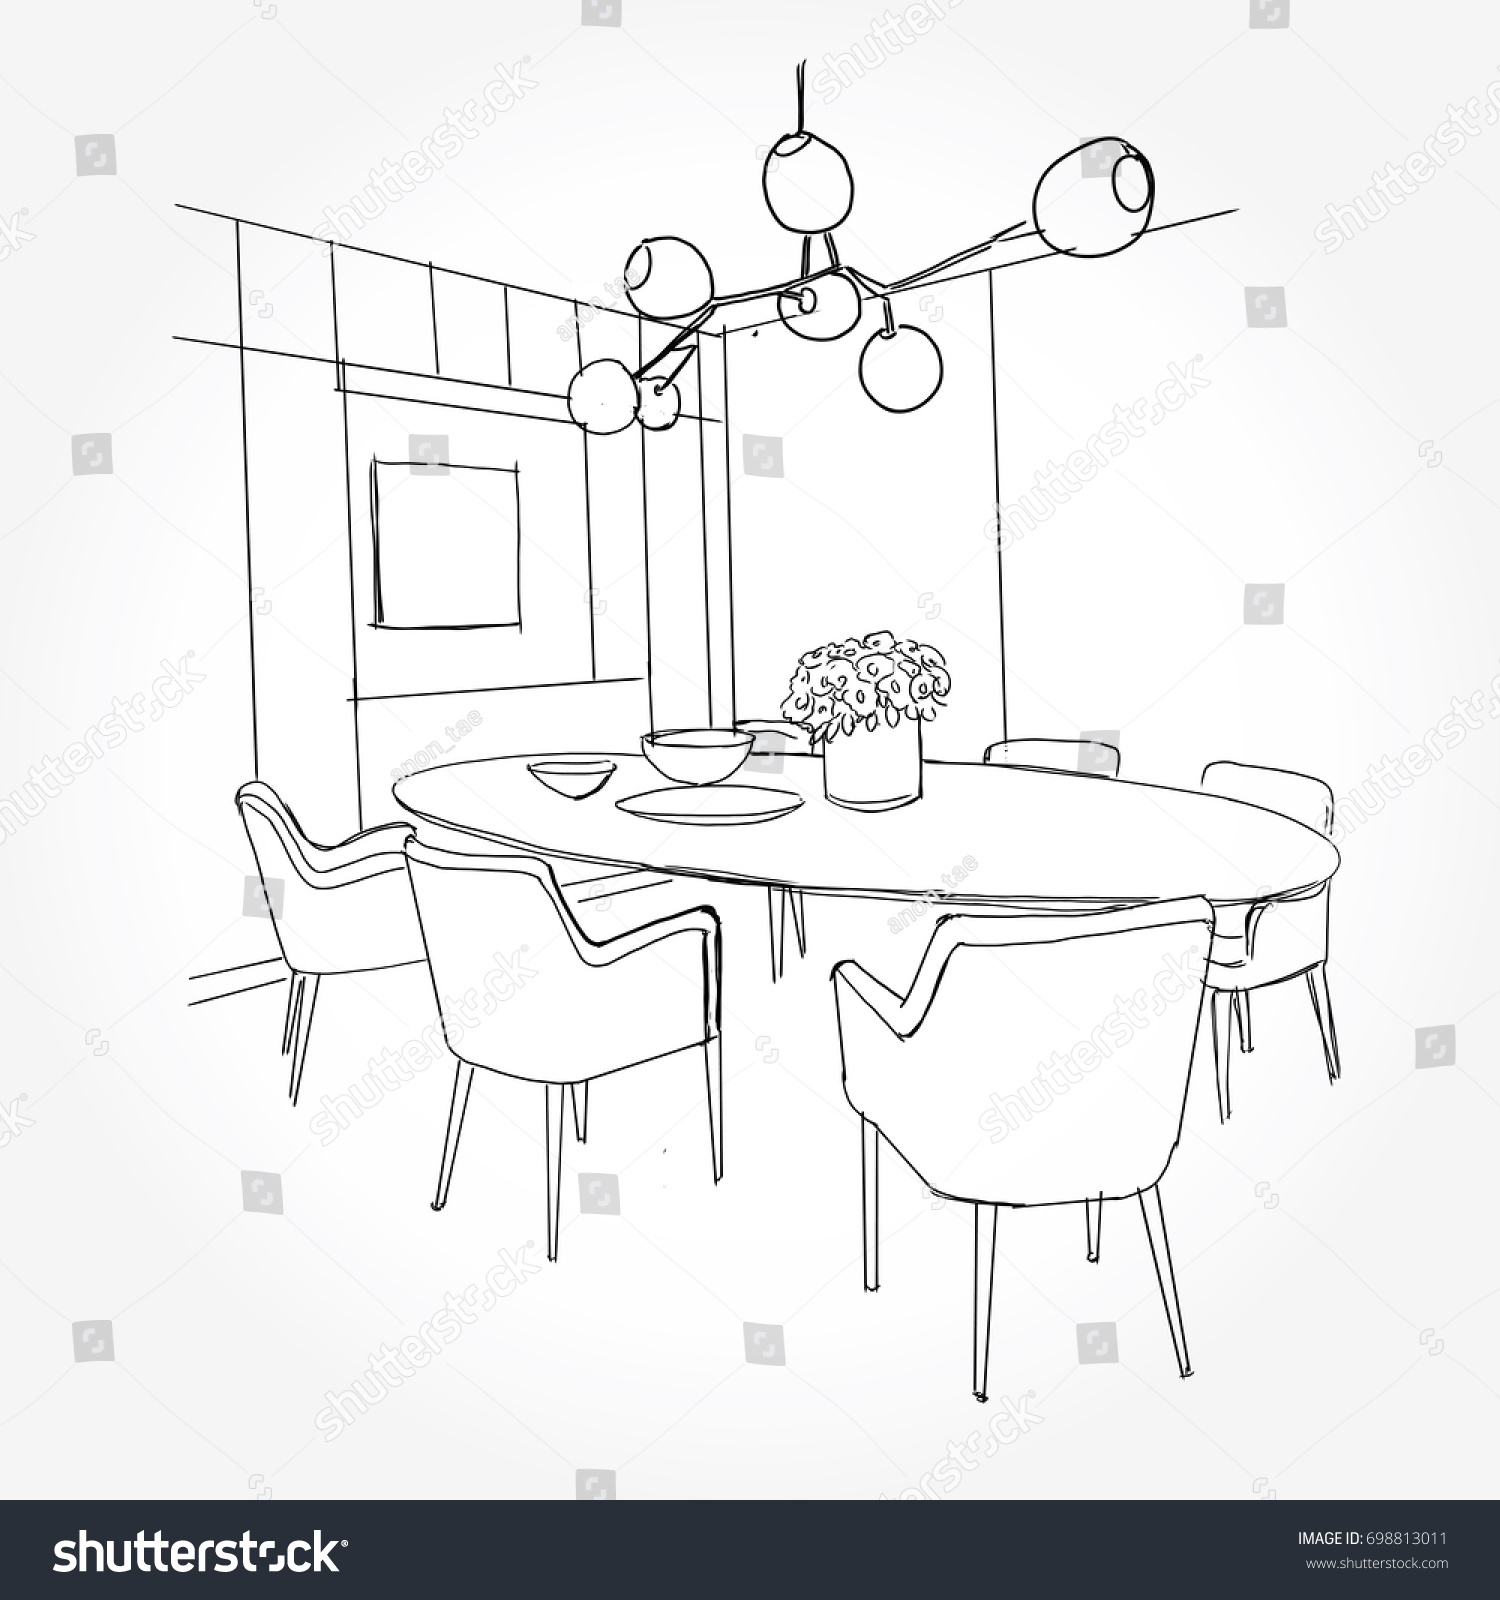 Linear Sketch Interior Dining Room Area The Arts